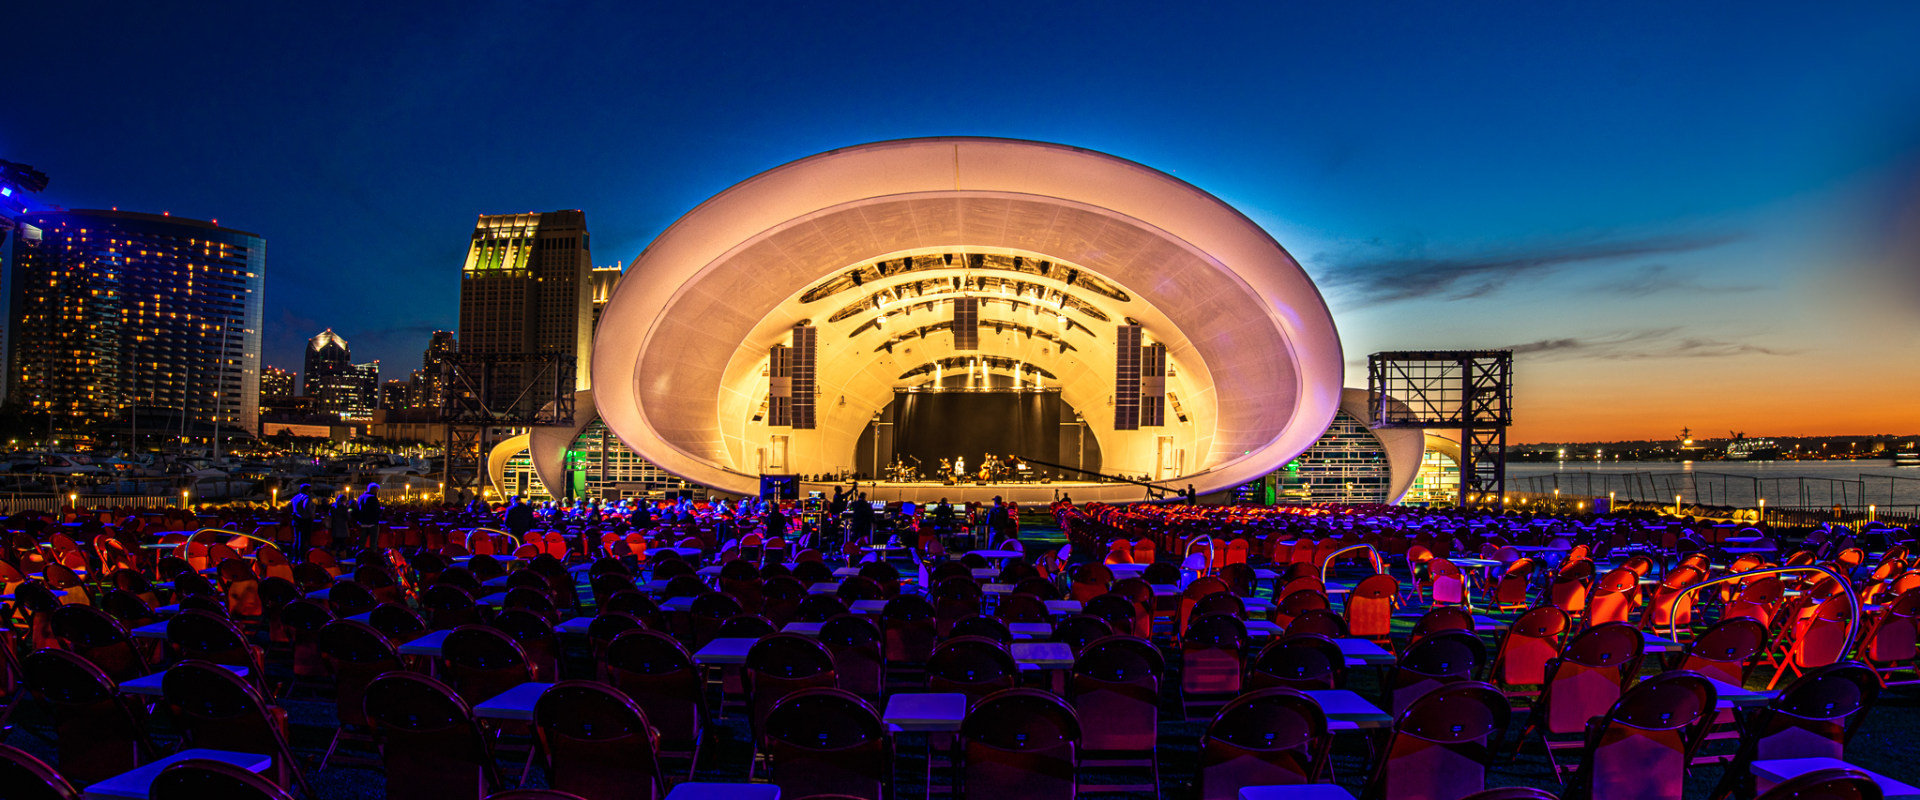 The Best Outdoor Music Venues in Southern California: An Expert's Guide